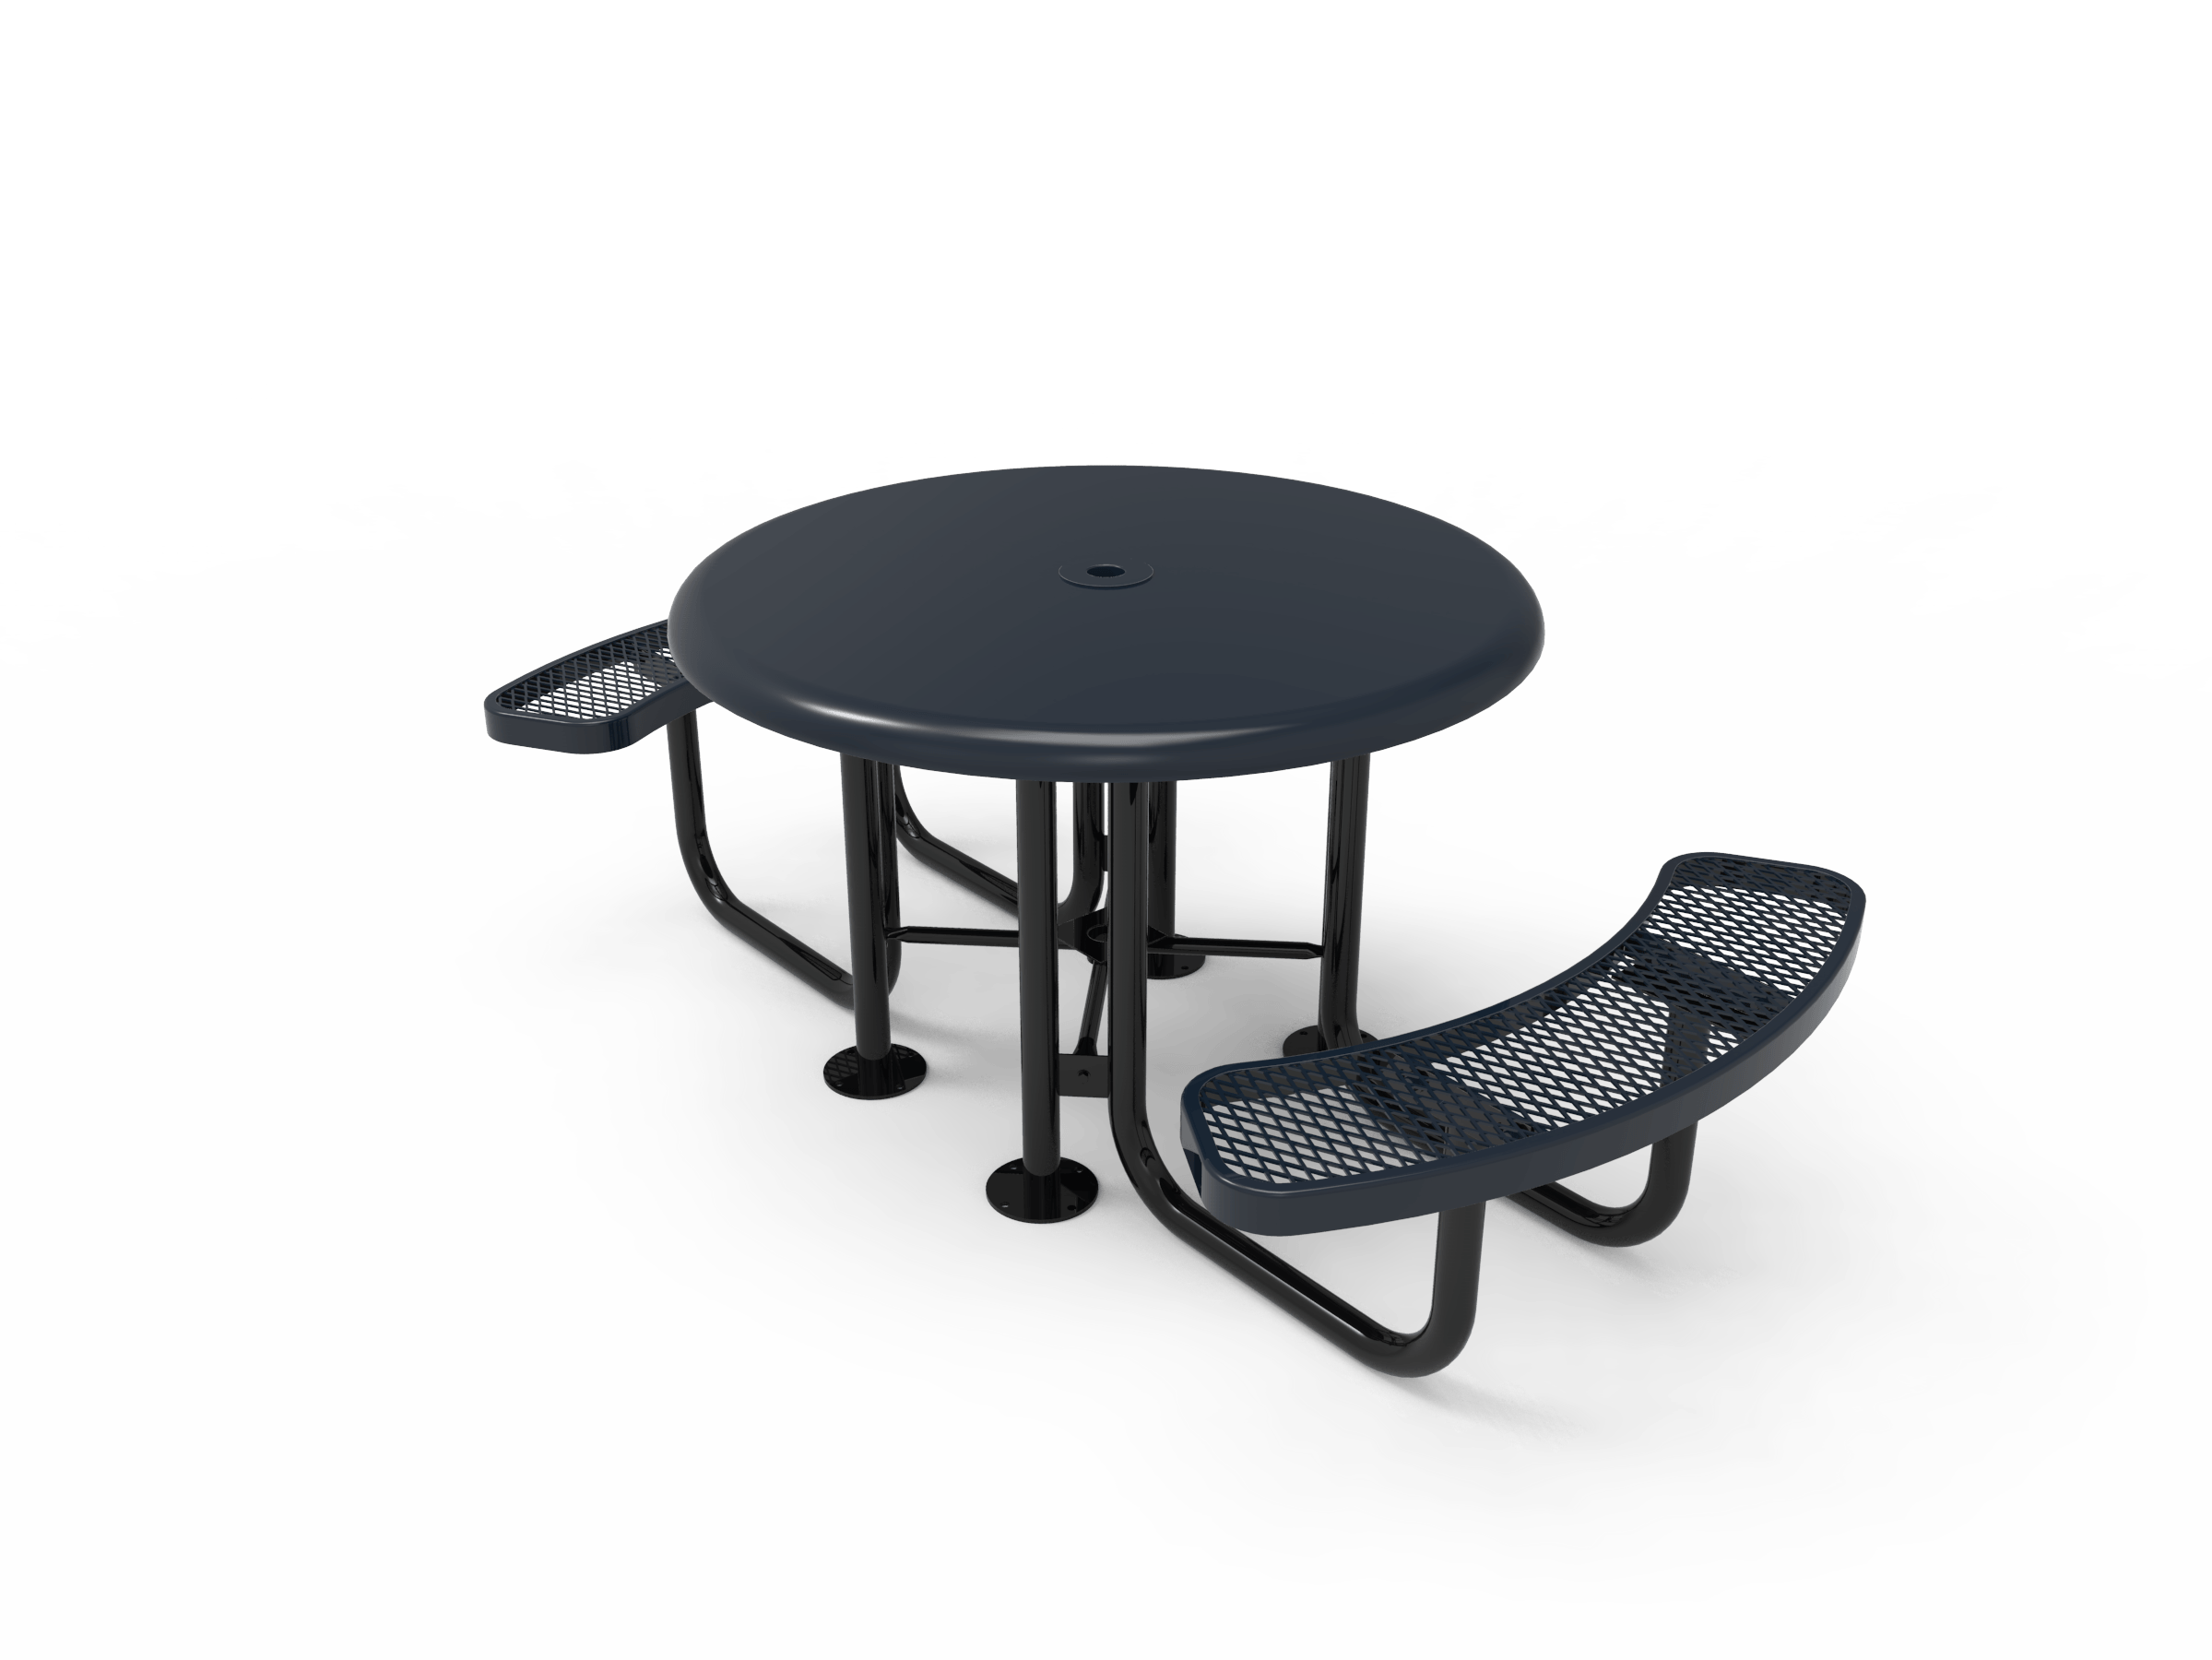 46″ Round Solid Picnic Table 2 Seat-Mesh
TRS46-C-04-002
Industry Standard Finish
$1209.00
TRS46-A-04-002
Advantage Premium Finish
$1619.00
